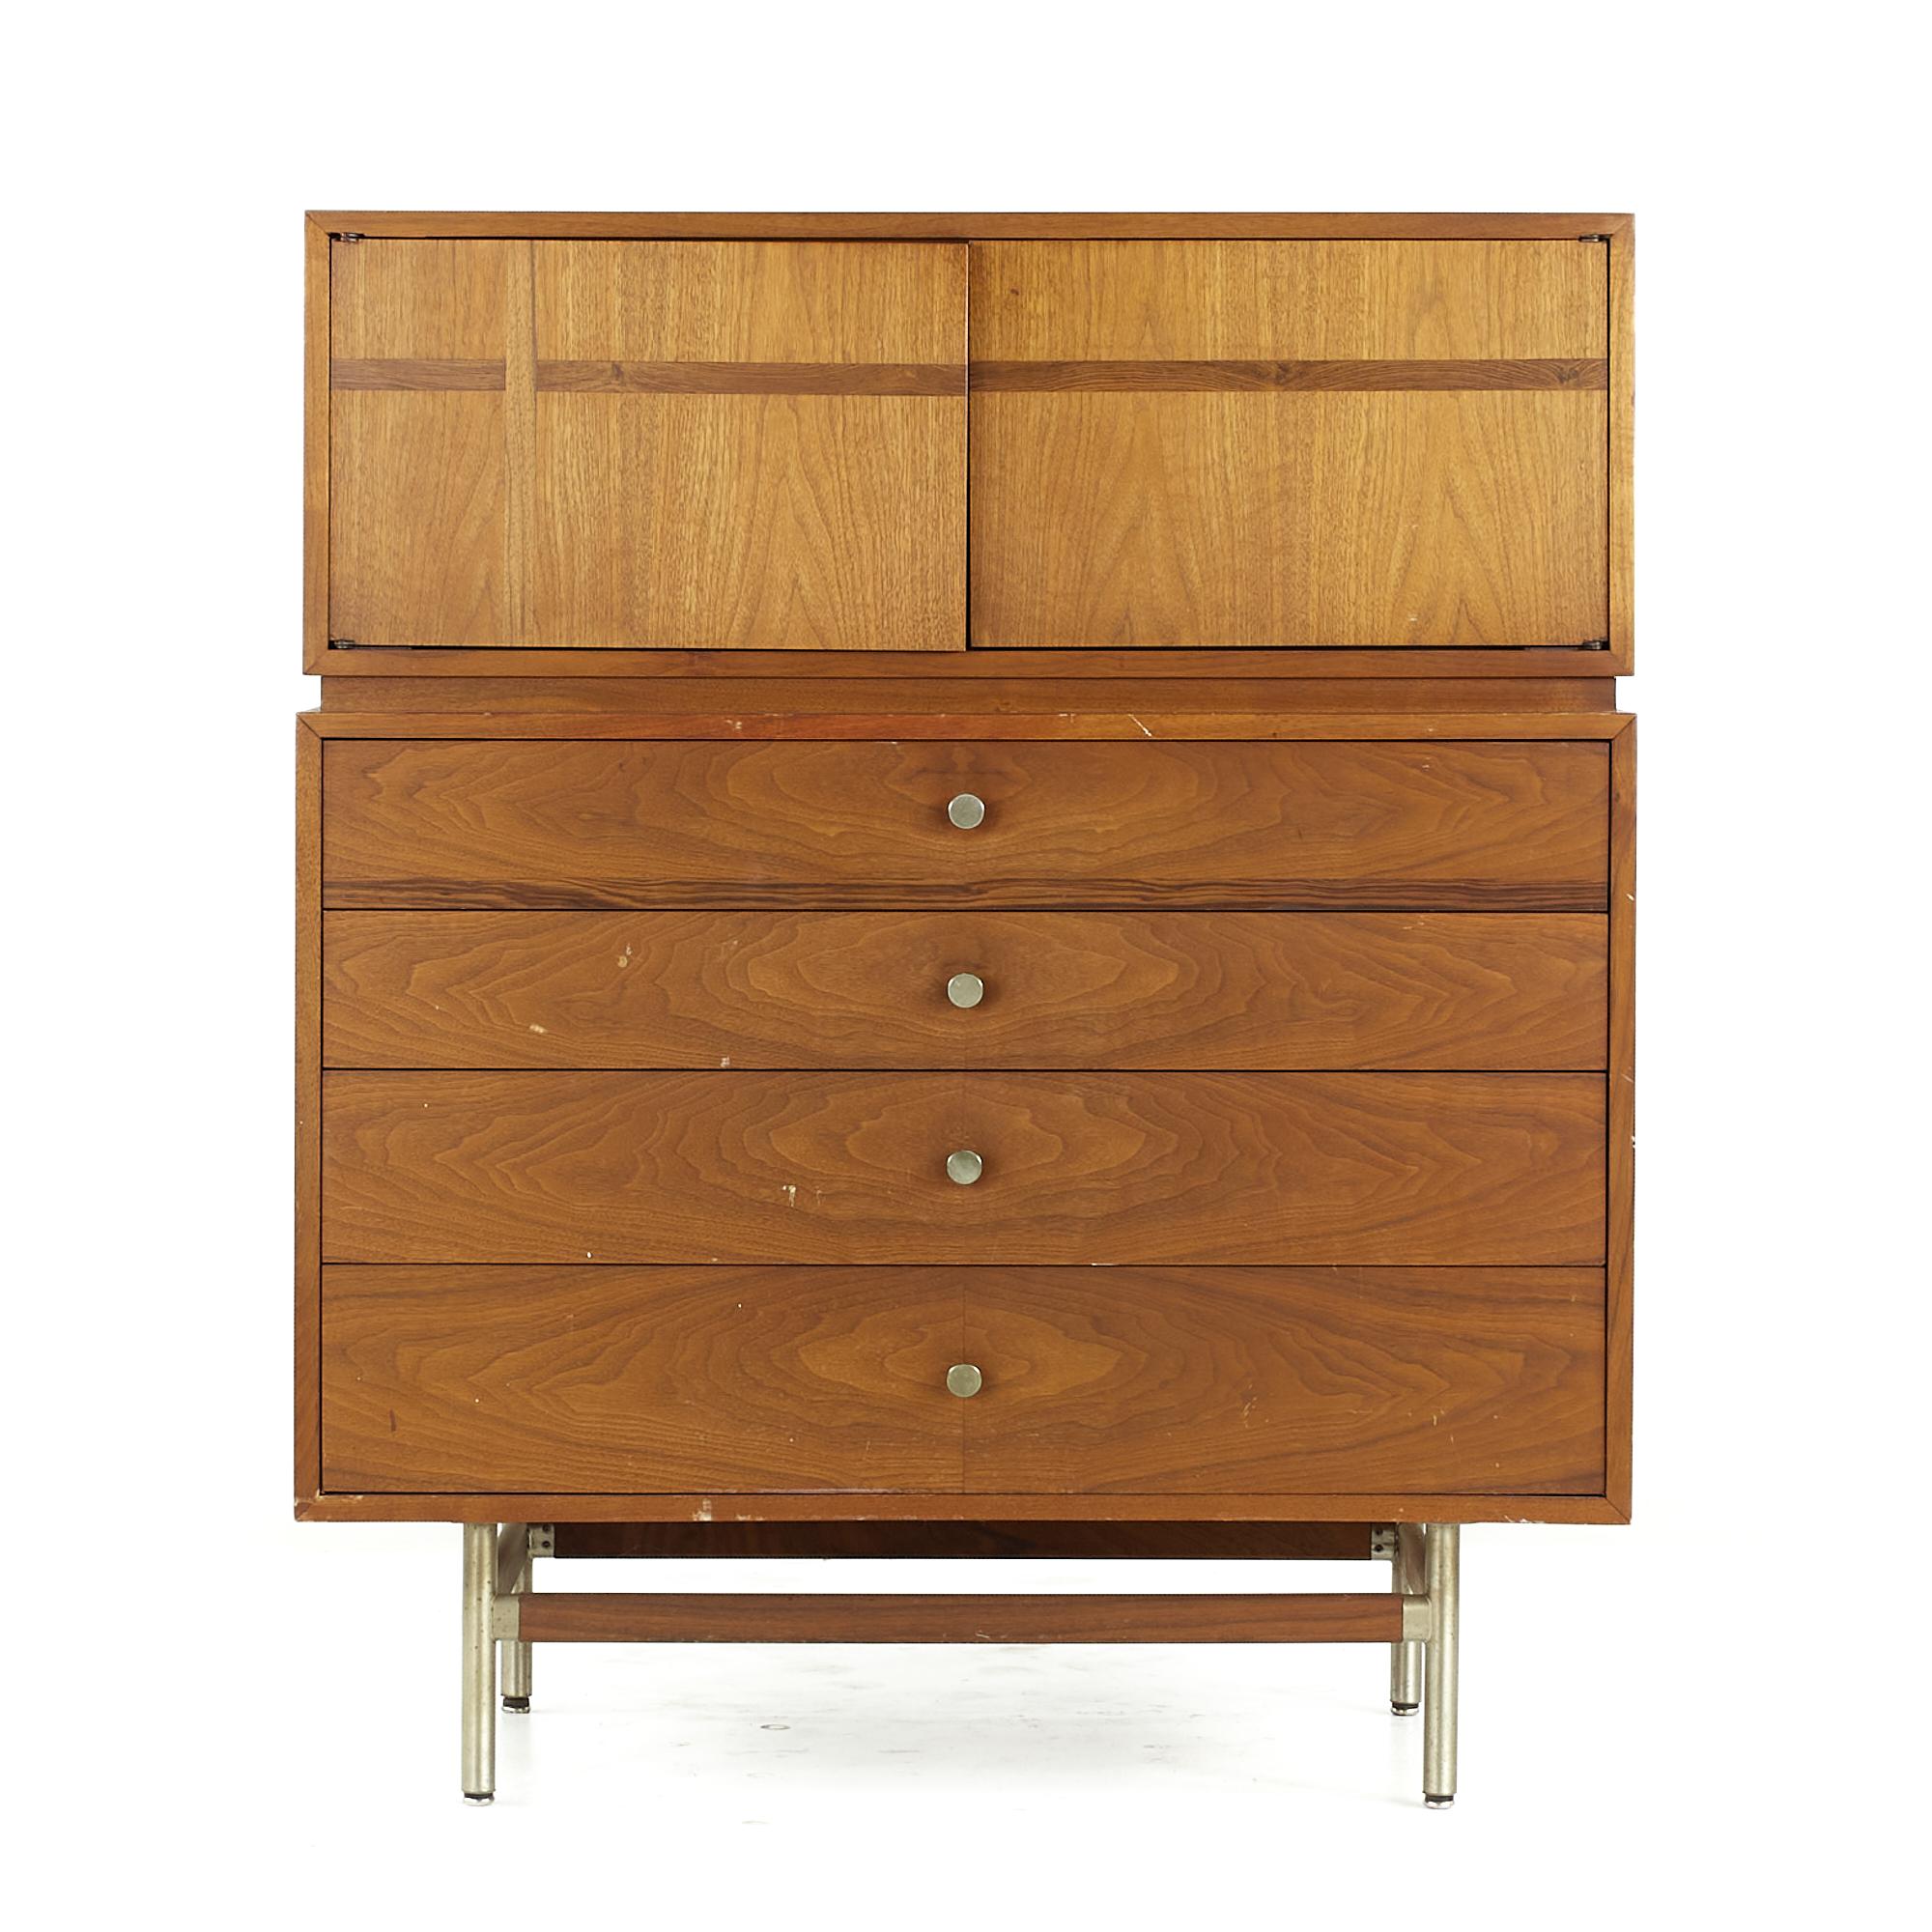 Kroehler Signature midcentury Rosewood and Walnut Highboy Dresser

This highboy measures: 38 wide x 19 deep x 45.75 inches high

All pieces of furniture can be had in what we call restored vintage condition. That means the piece is restored upon